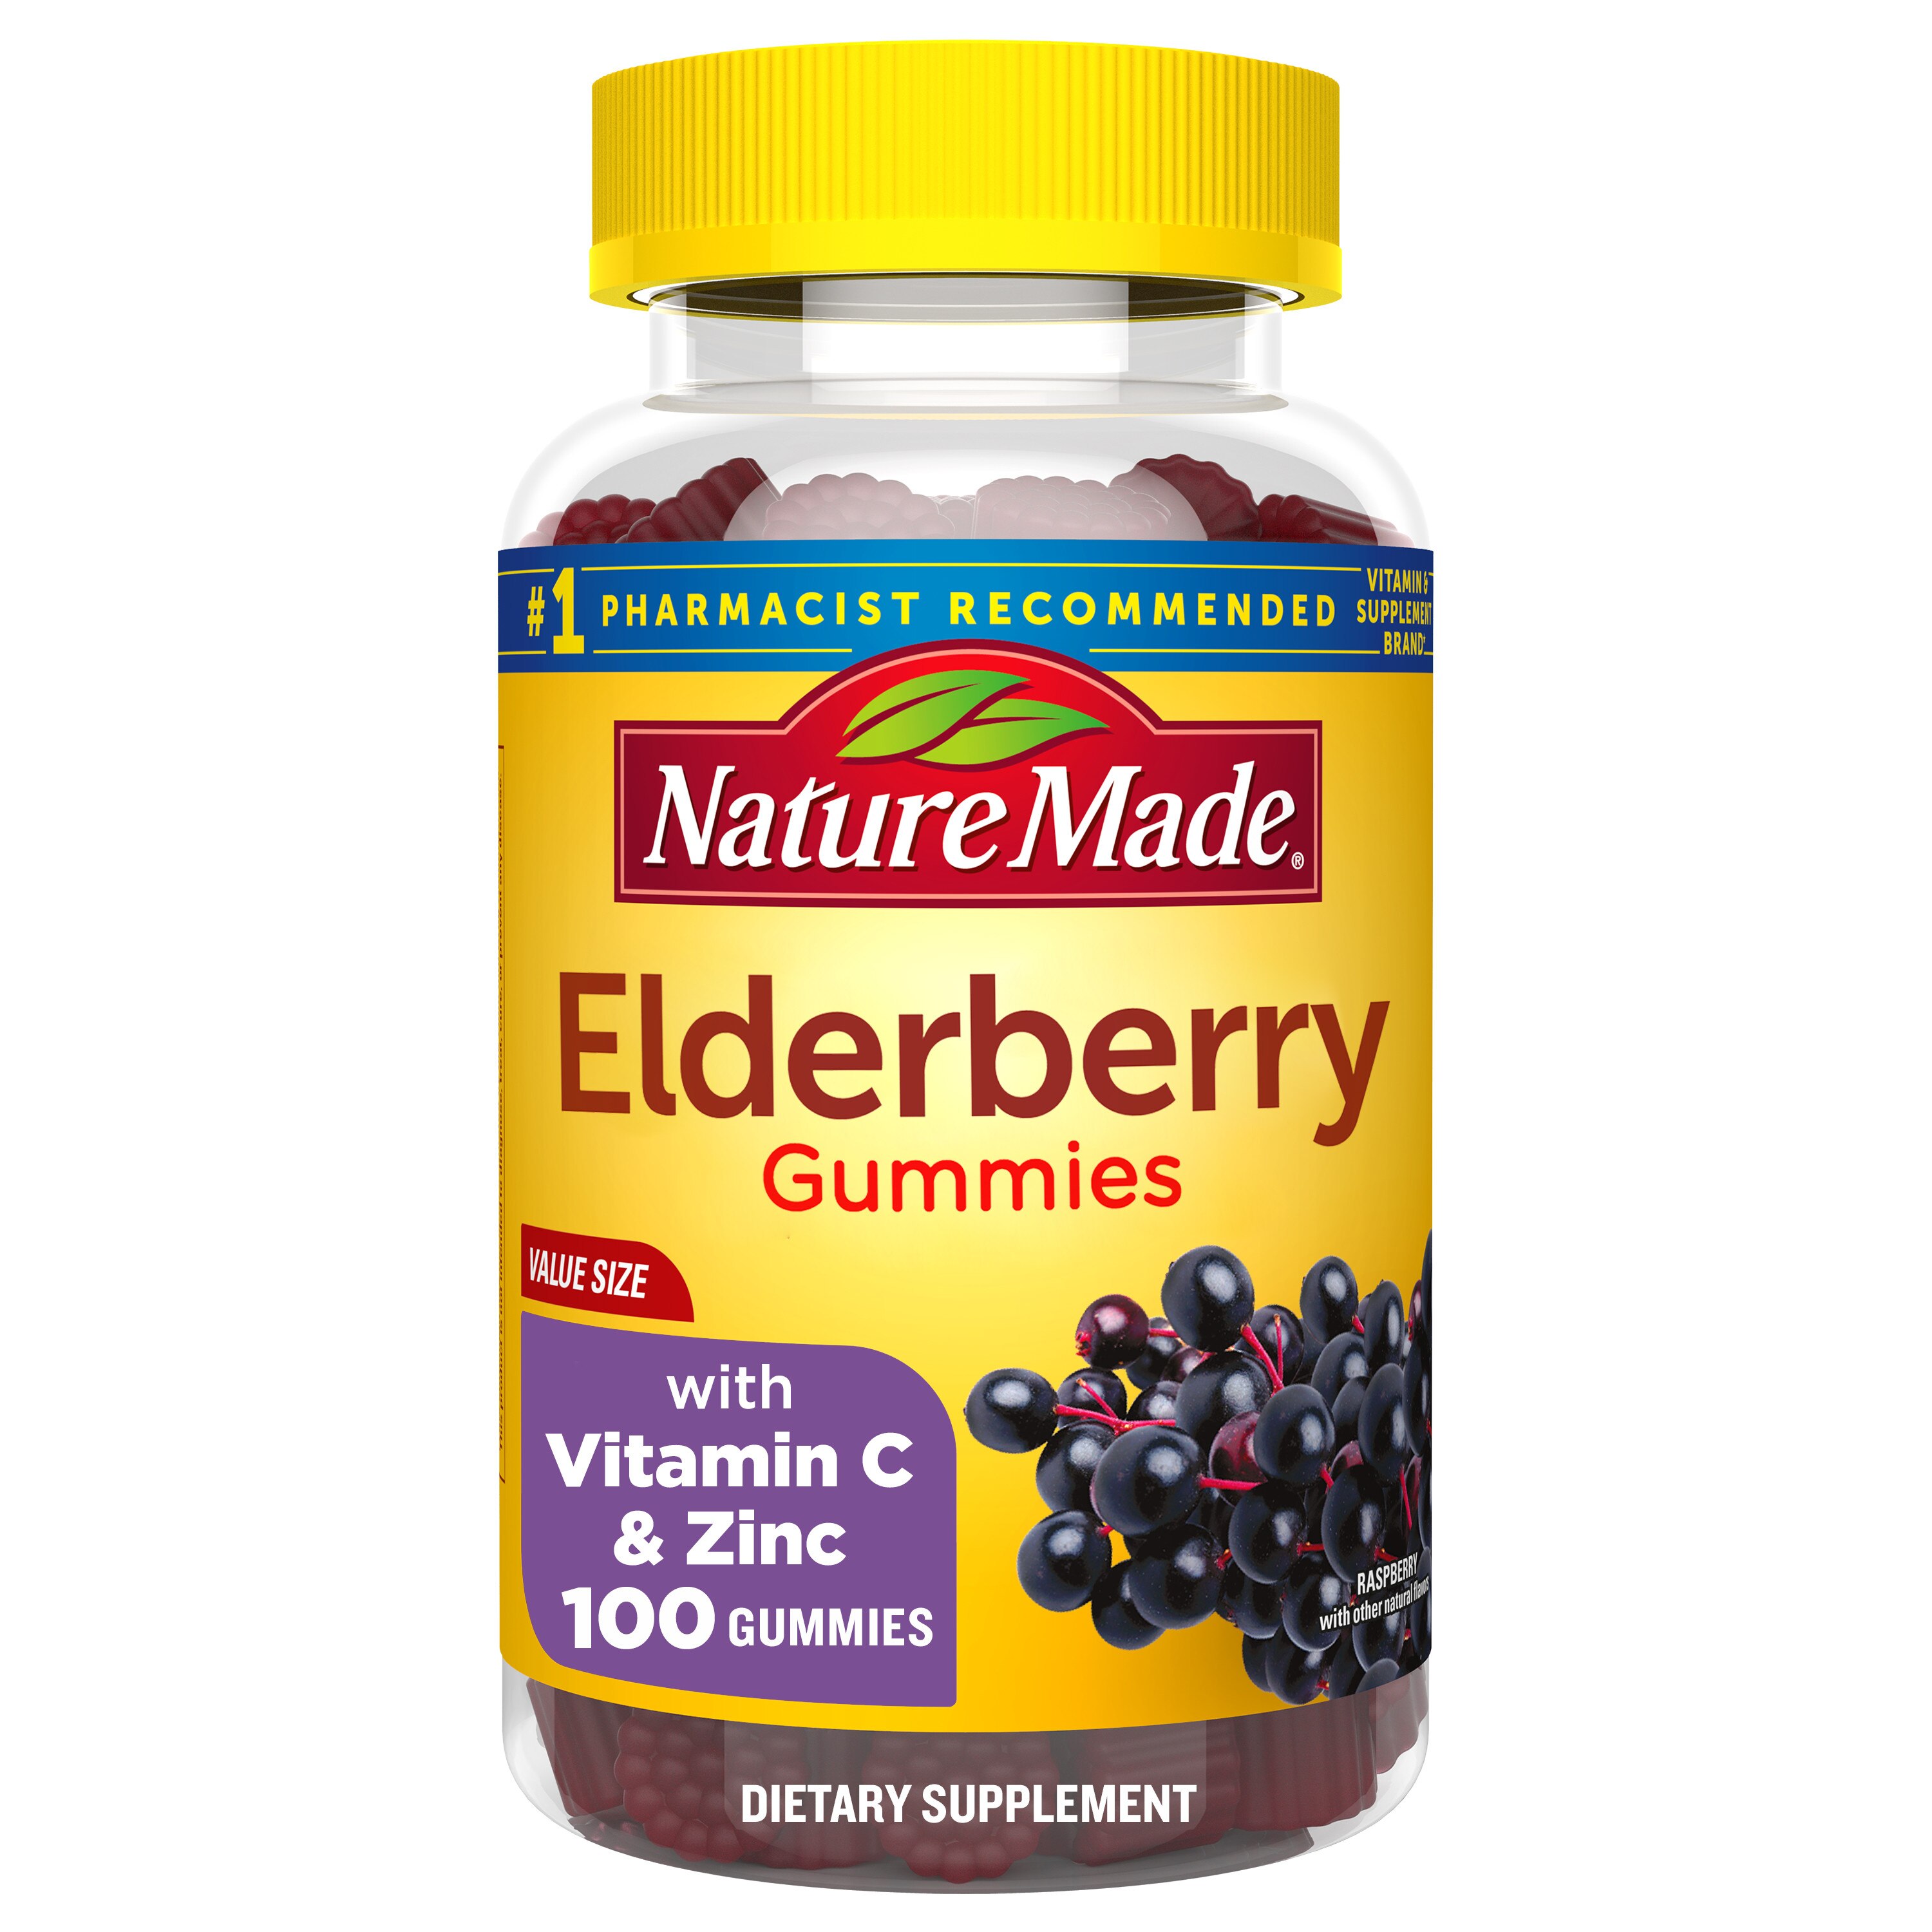 Nature Made Elderberry with Vitamin C and Zinc Gummies, 100 CT